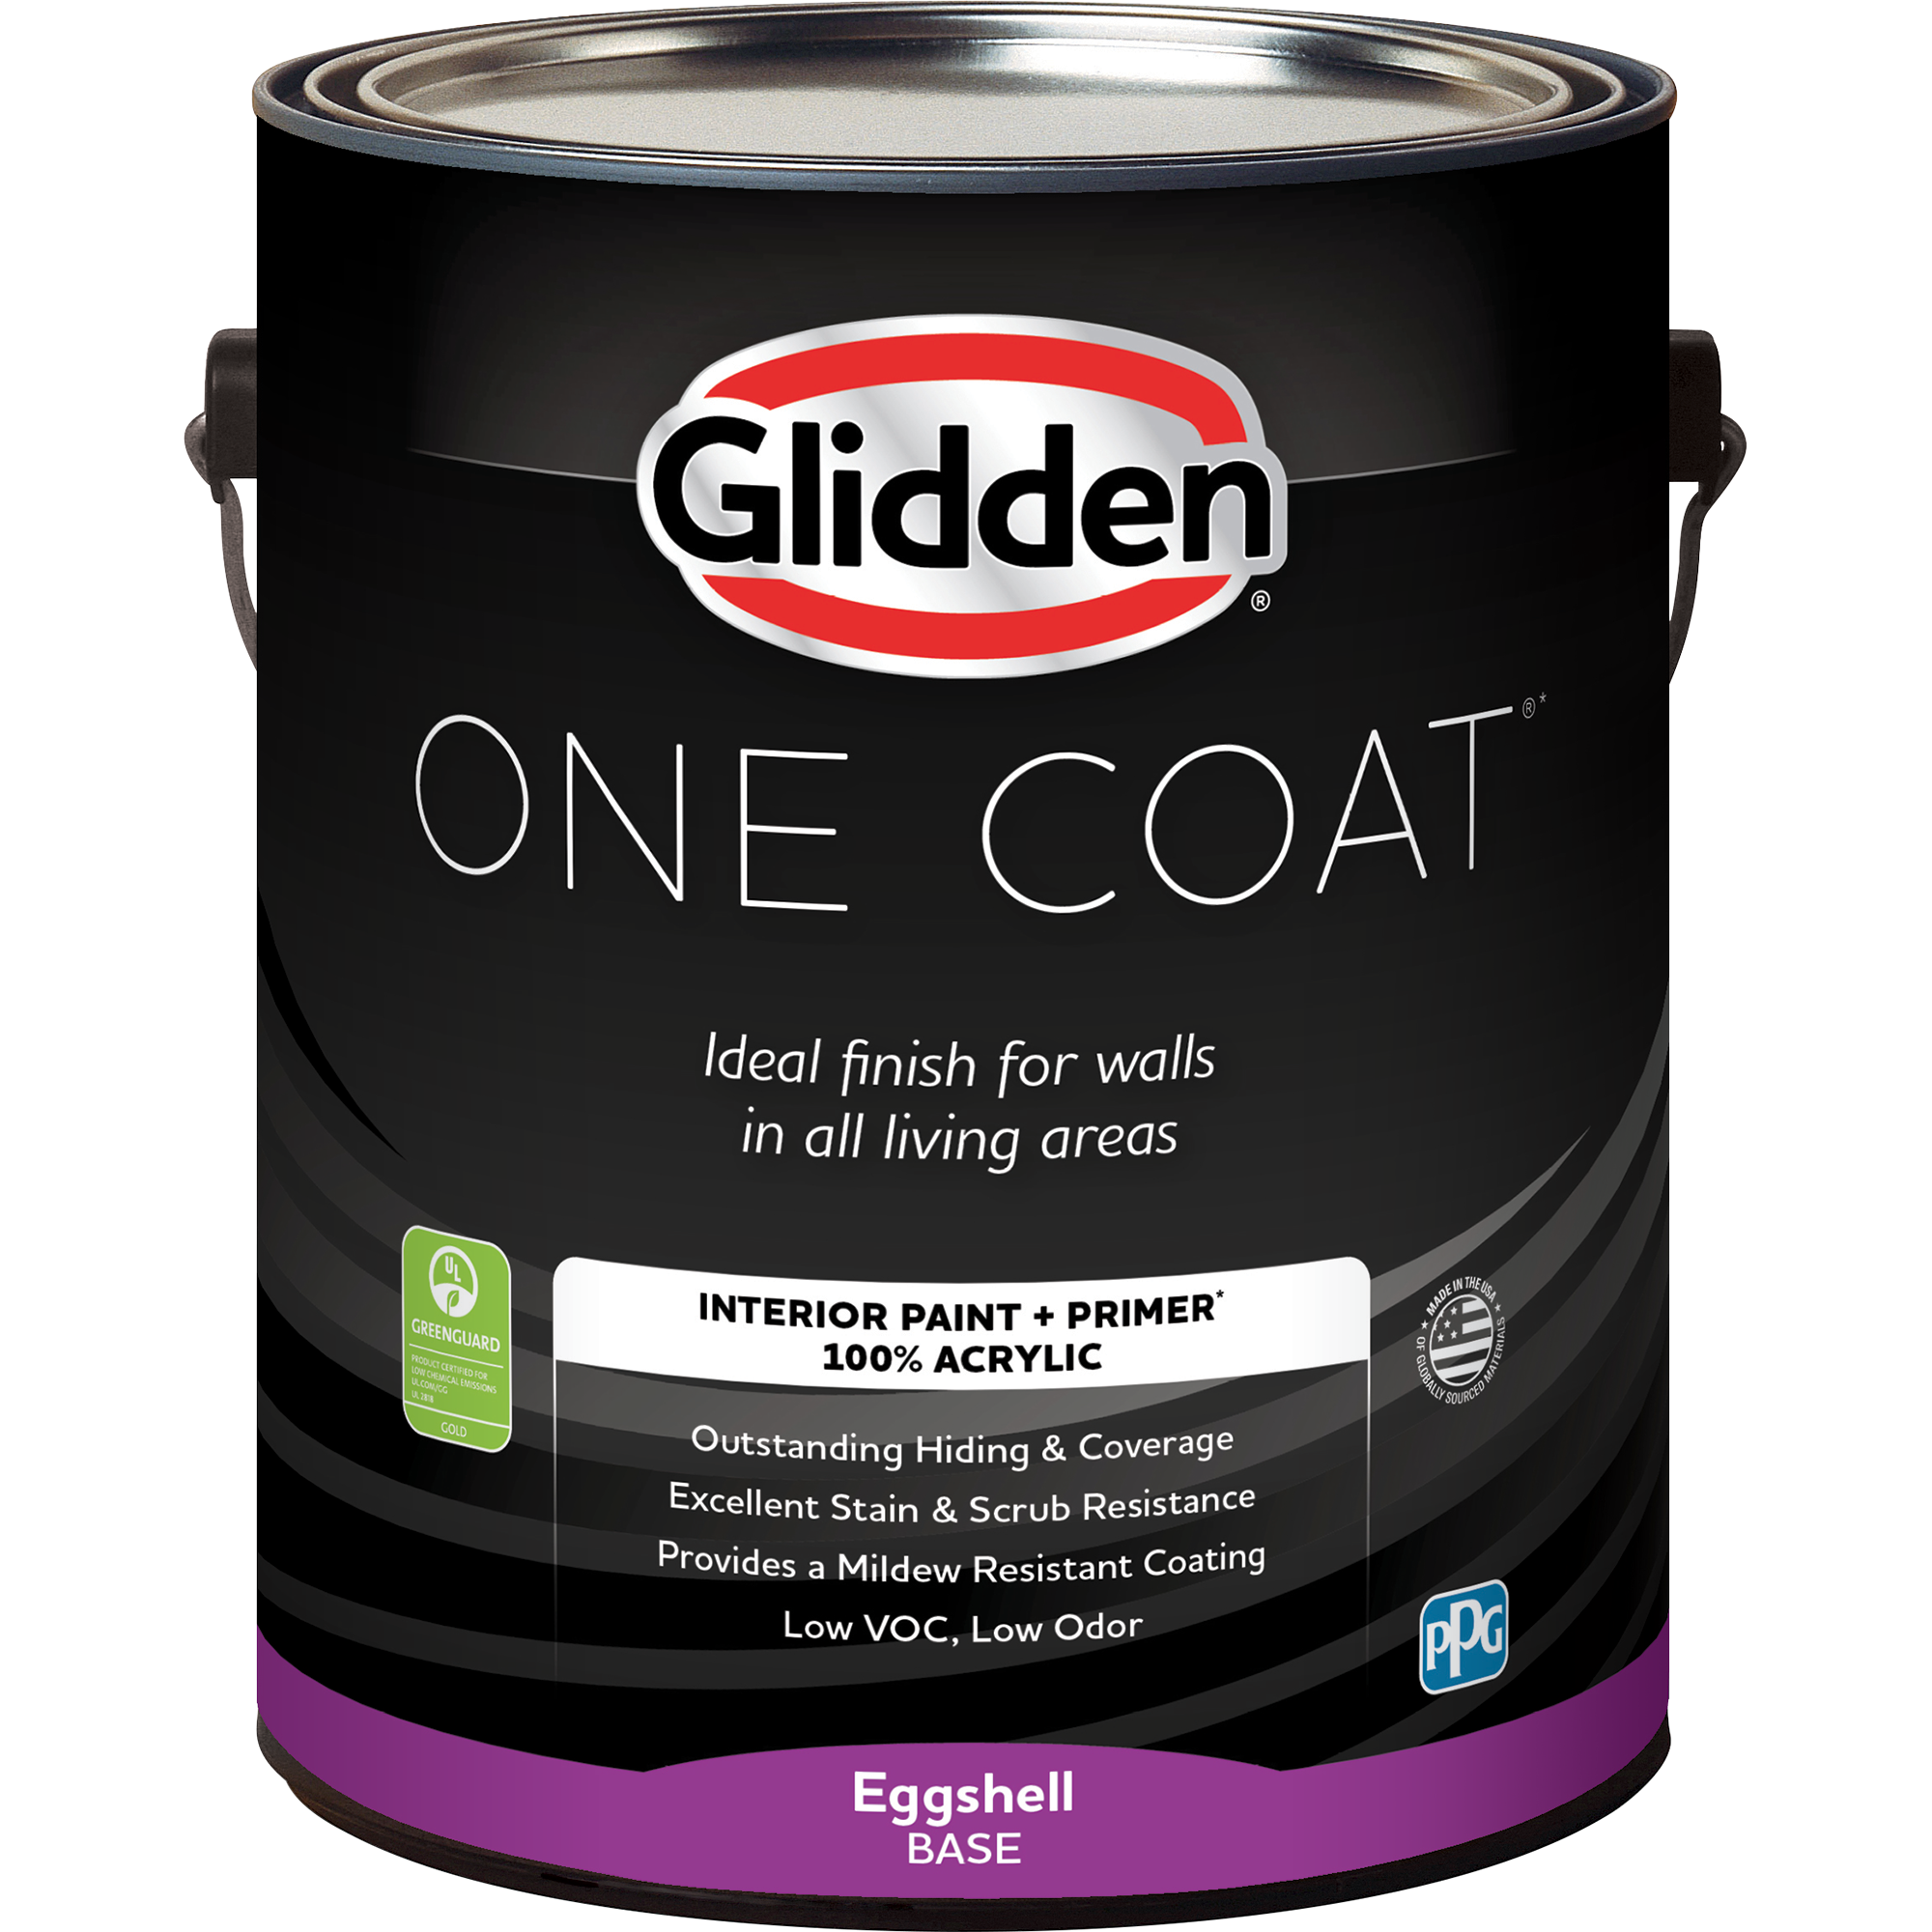 Glidden One Coat Interior Paint and Primer, Taupe Tapestry / Orange, Gallon, Eggshell - image 11 of 11